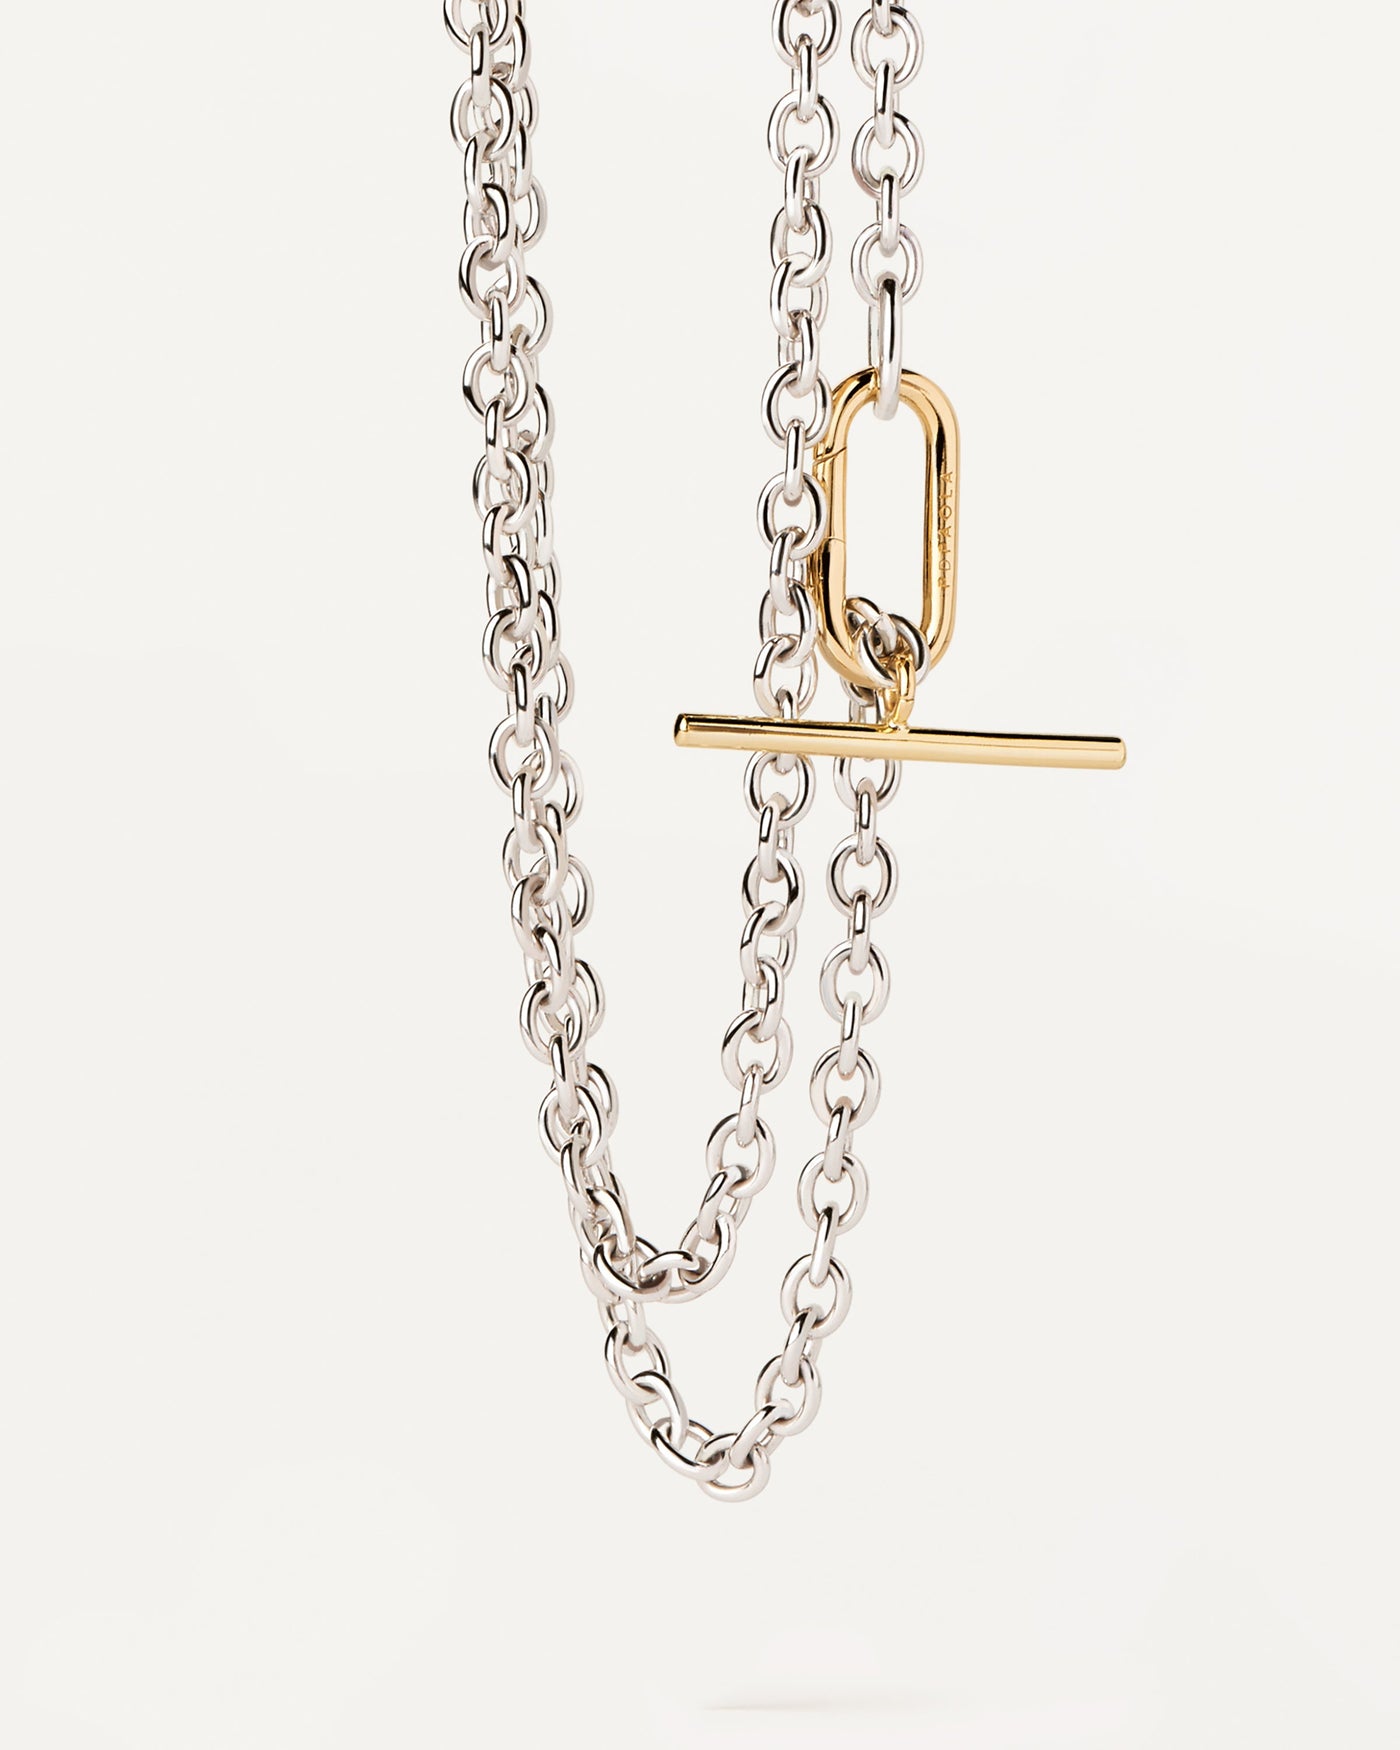 2023 Selection | Long Beat Chain Necklace. Bicolor T-bar double chain necklace with silver links and gold-plated clasp. Get the latest arrival from PDPAOLA. Place your order safely and get this Best Seller. Free Shipping.